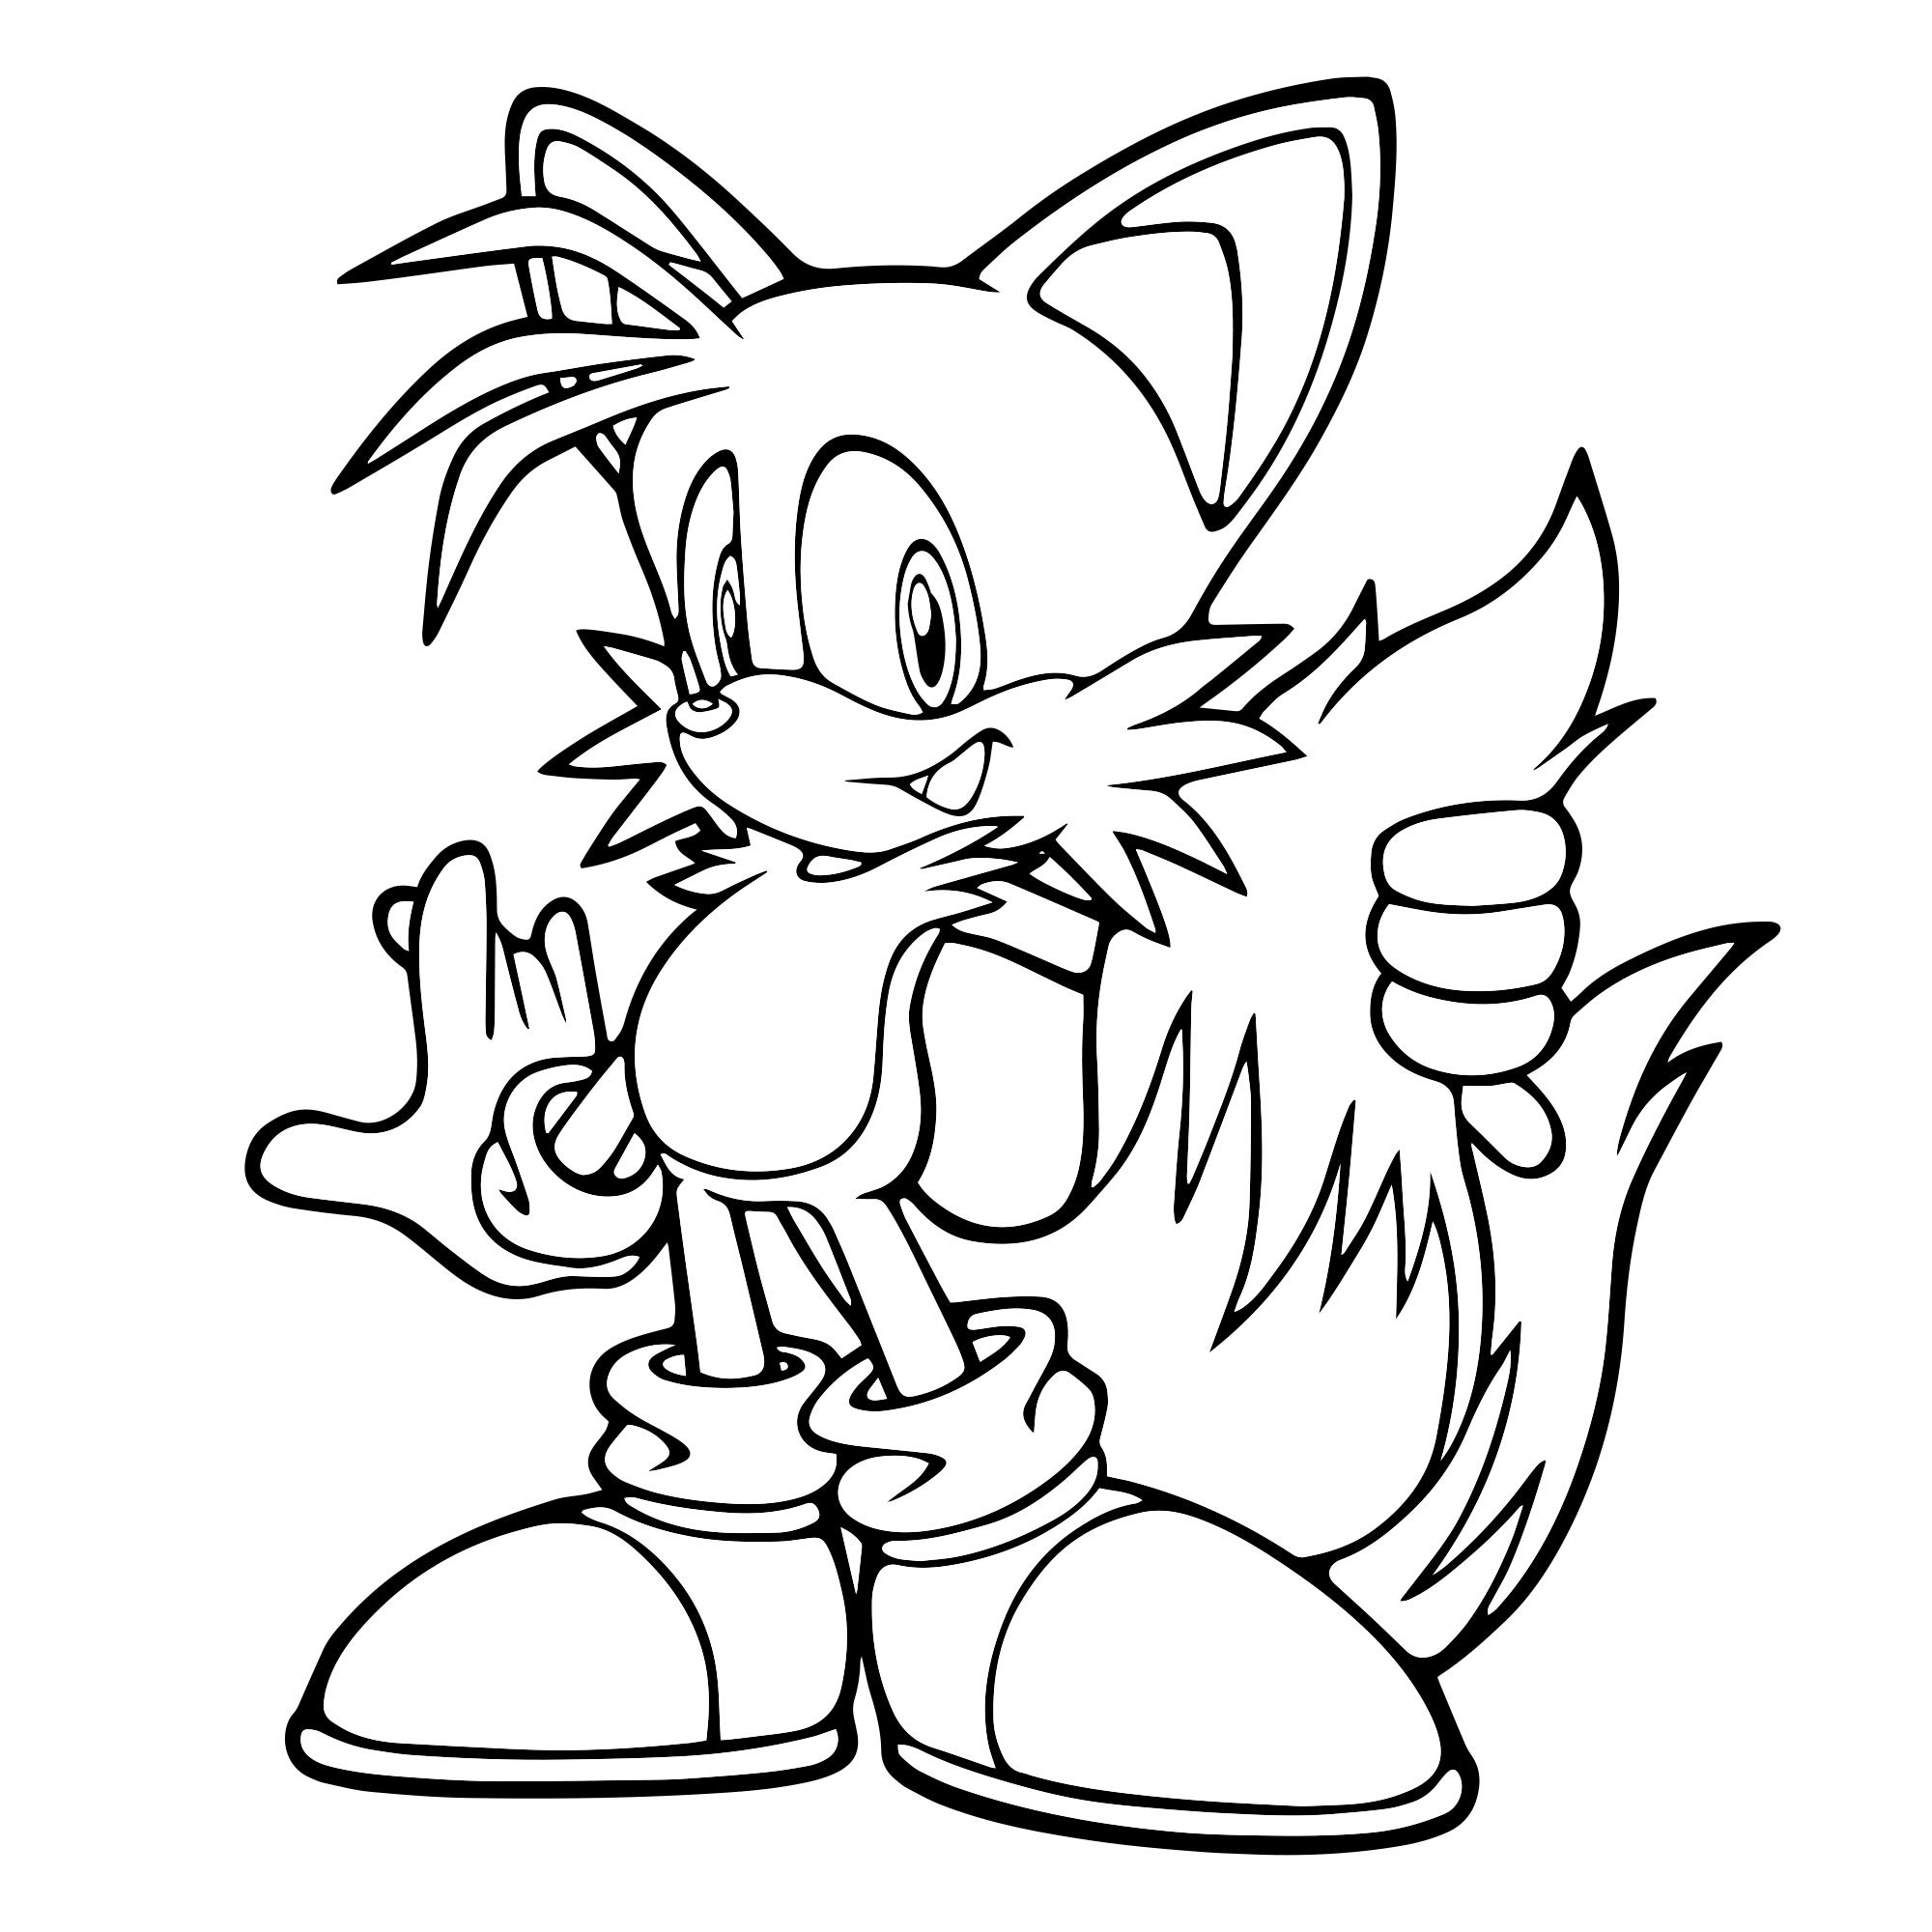 Sonic theos coloring page